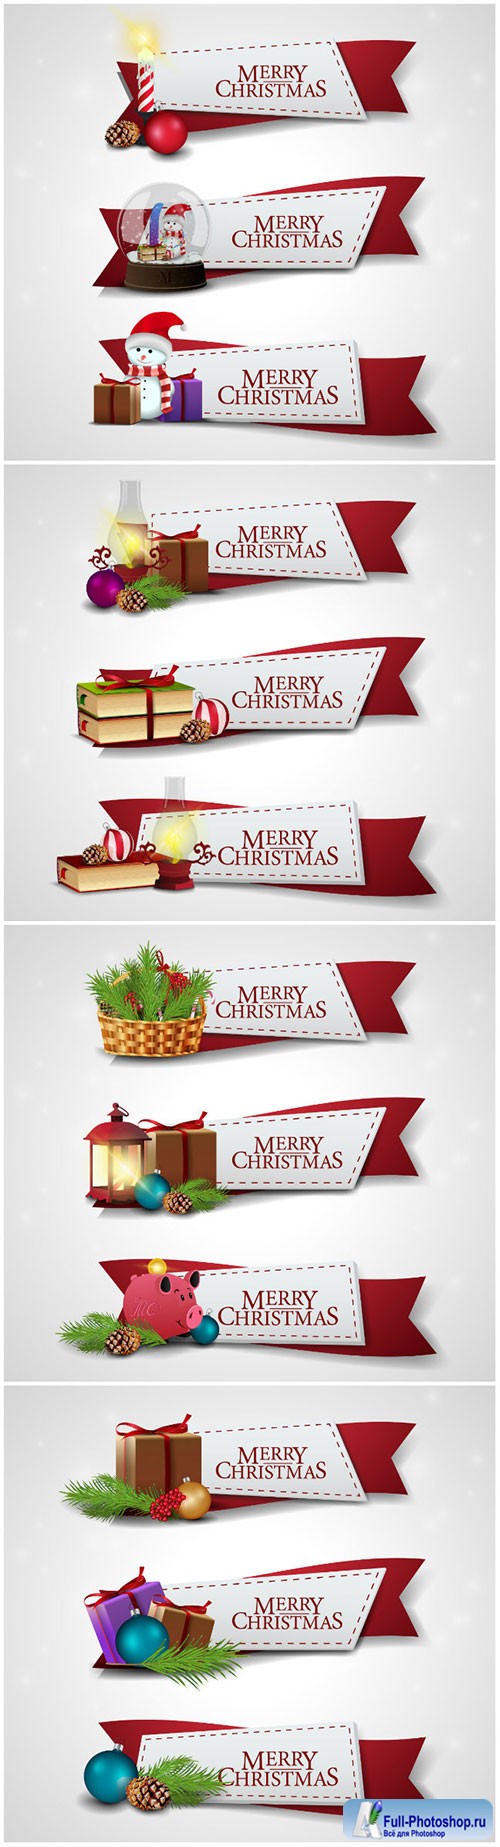 Christmas vector ribbons with cartoon Christmas icons